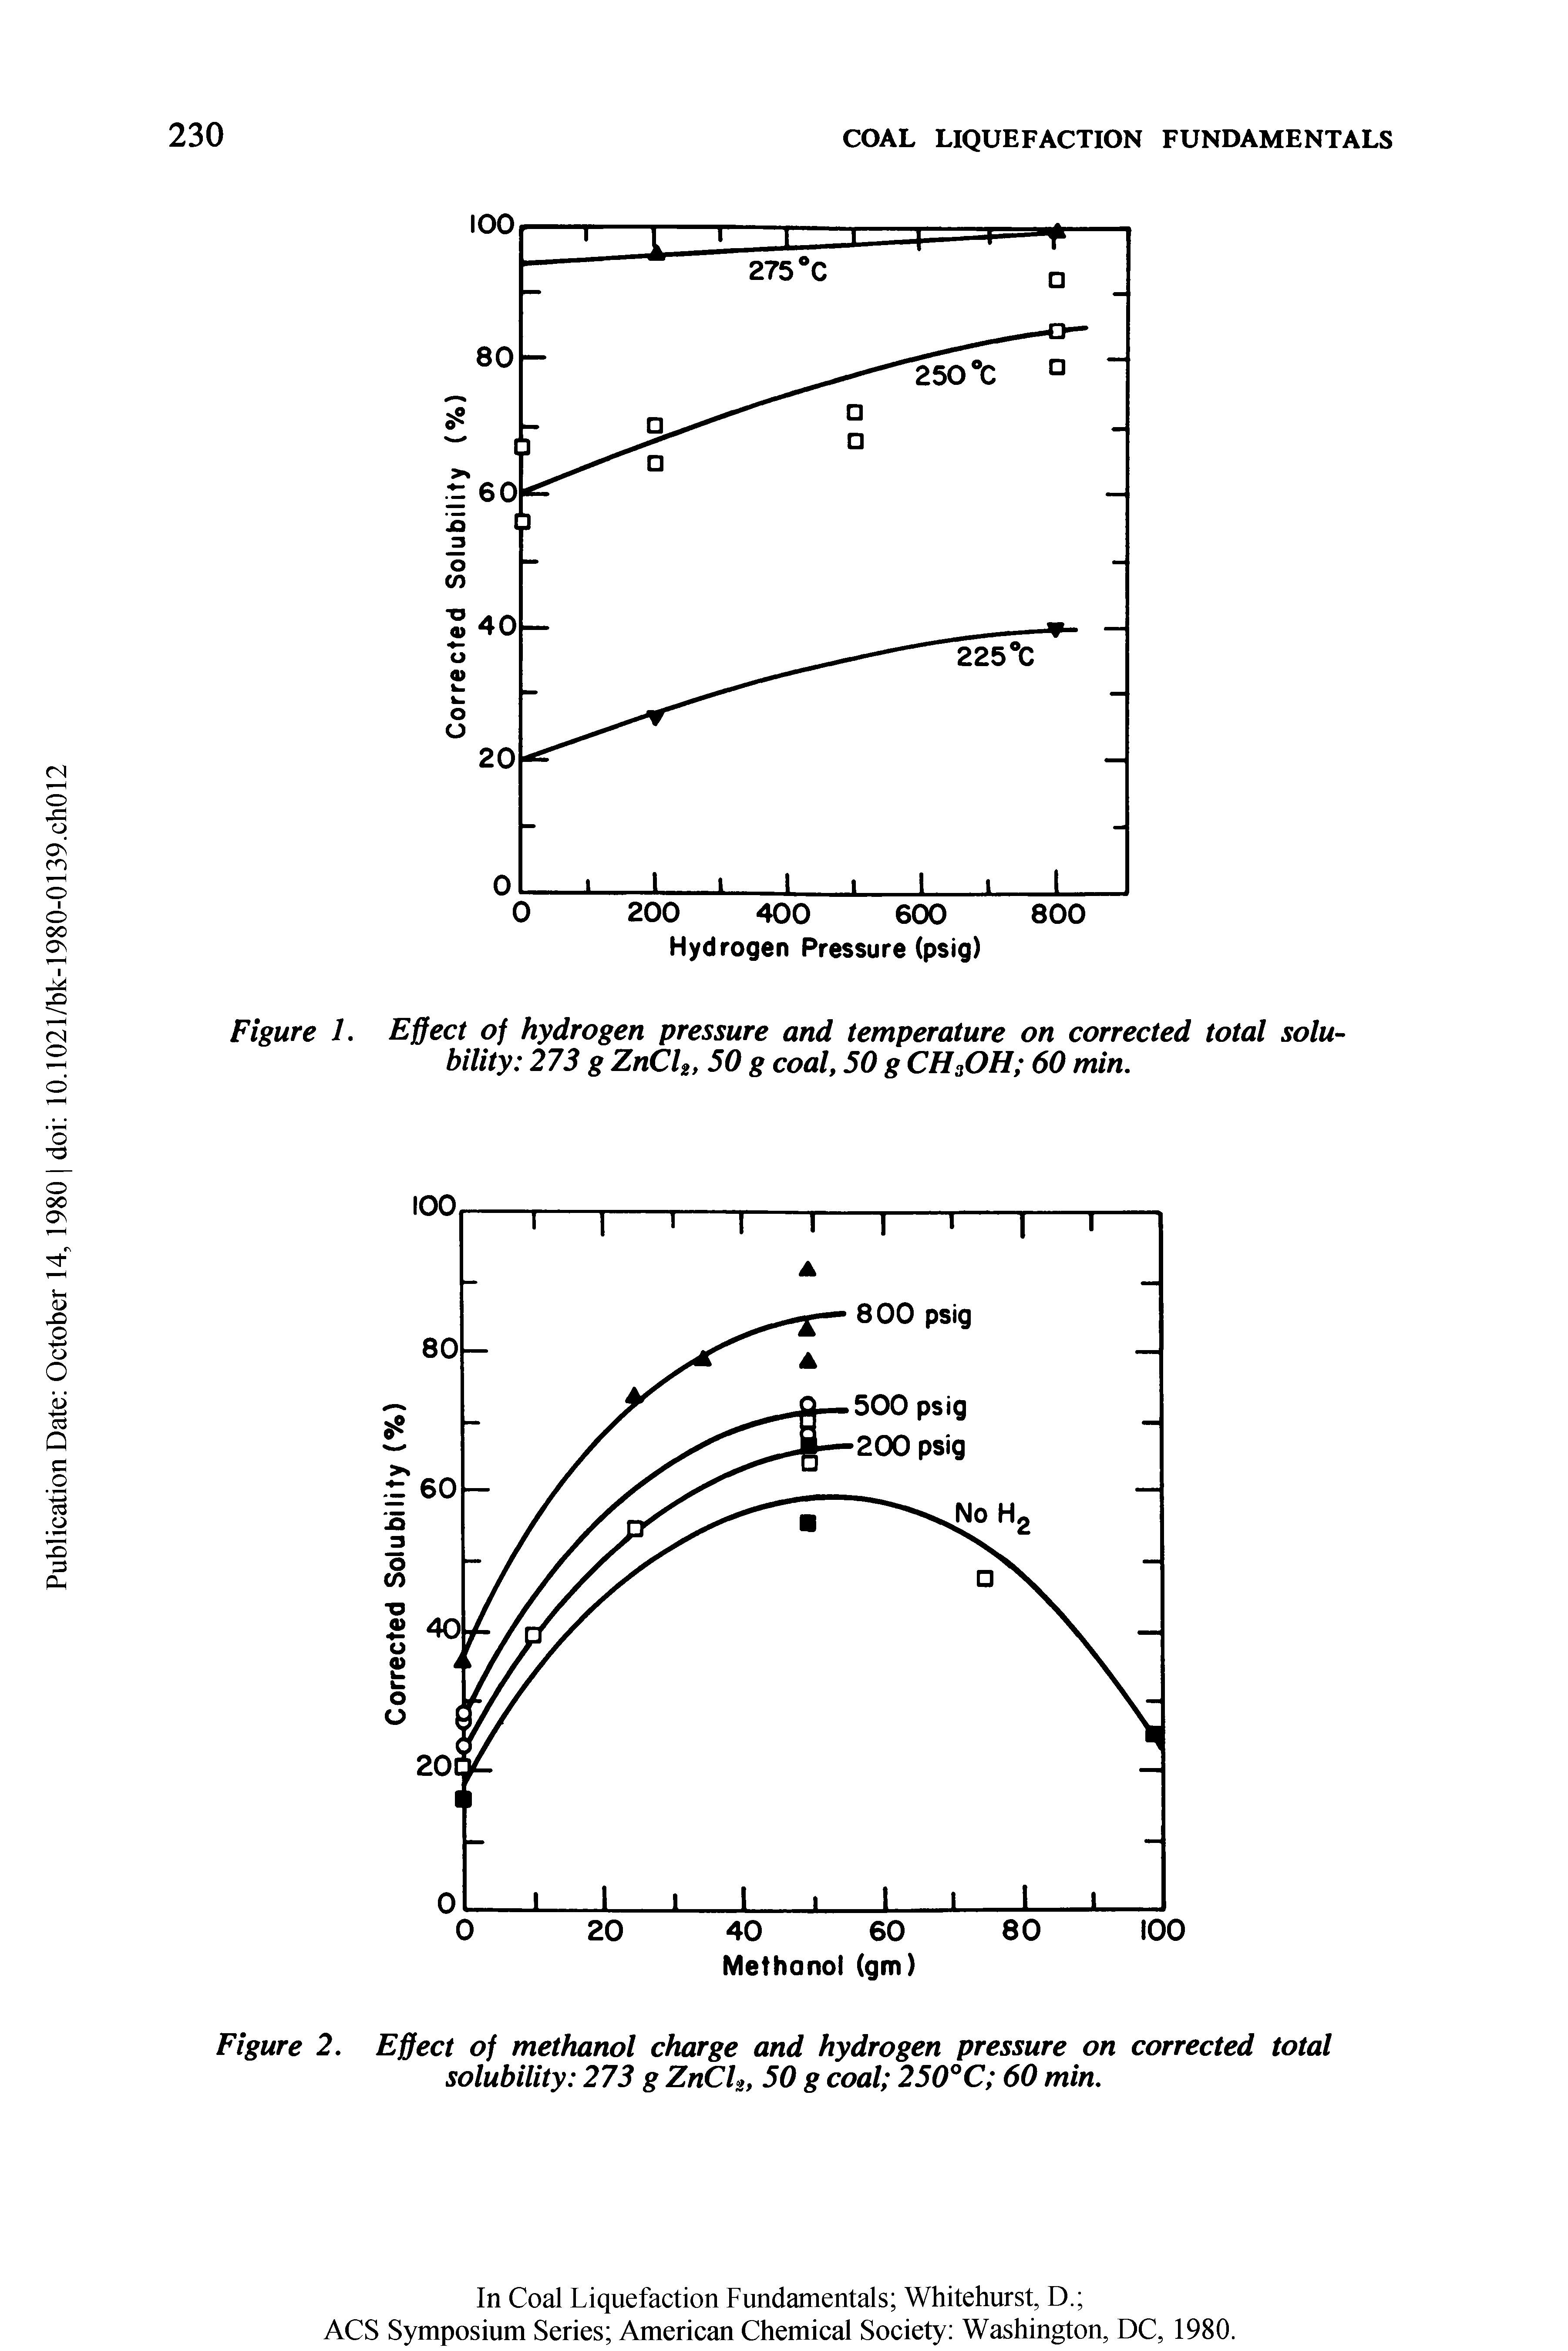 Figure 1. Effect of hydrogen pressure and temperature on corrected total solubility 273 g ZnCl2, 50 g coal, 50 g CHsOH 60 min.